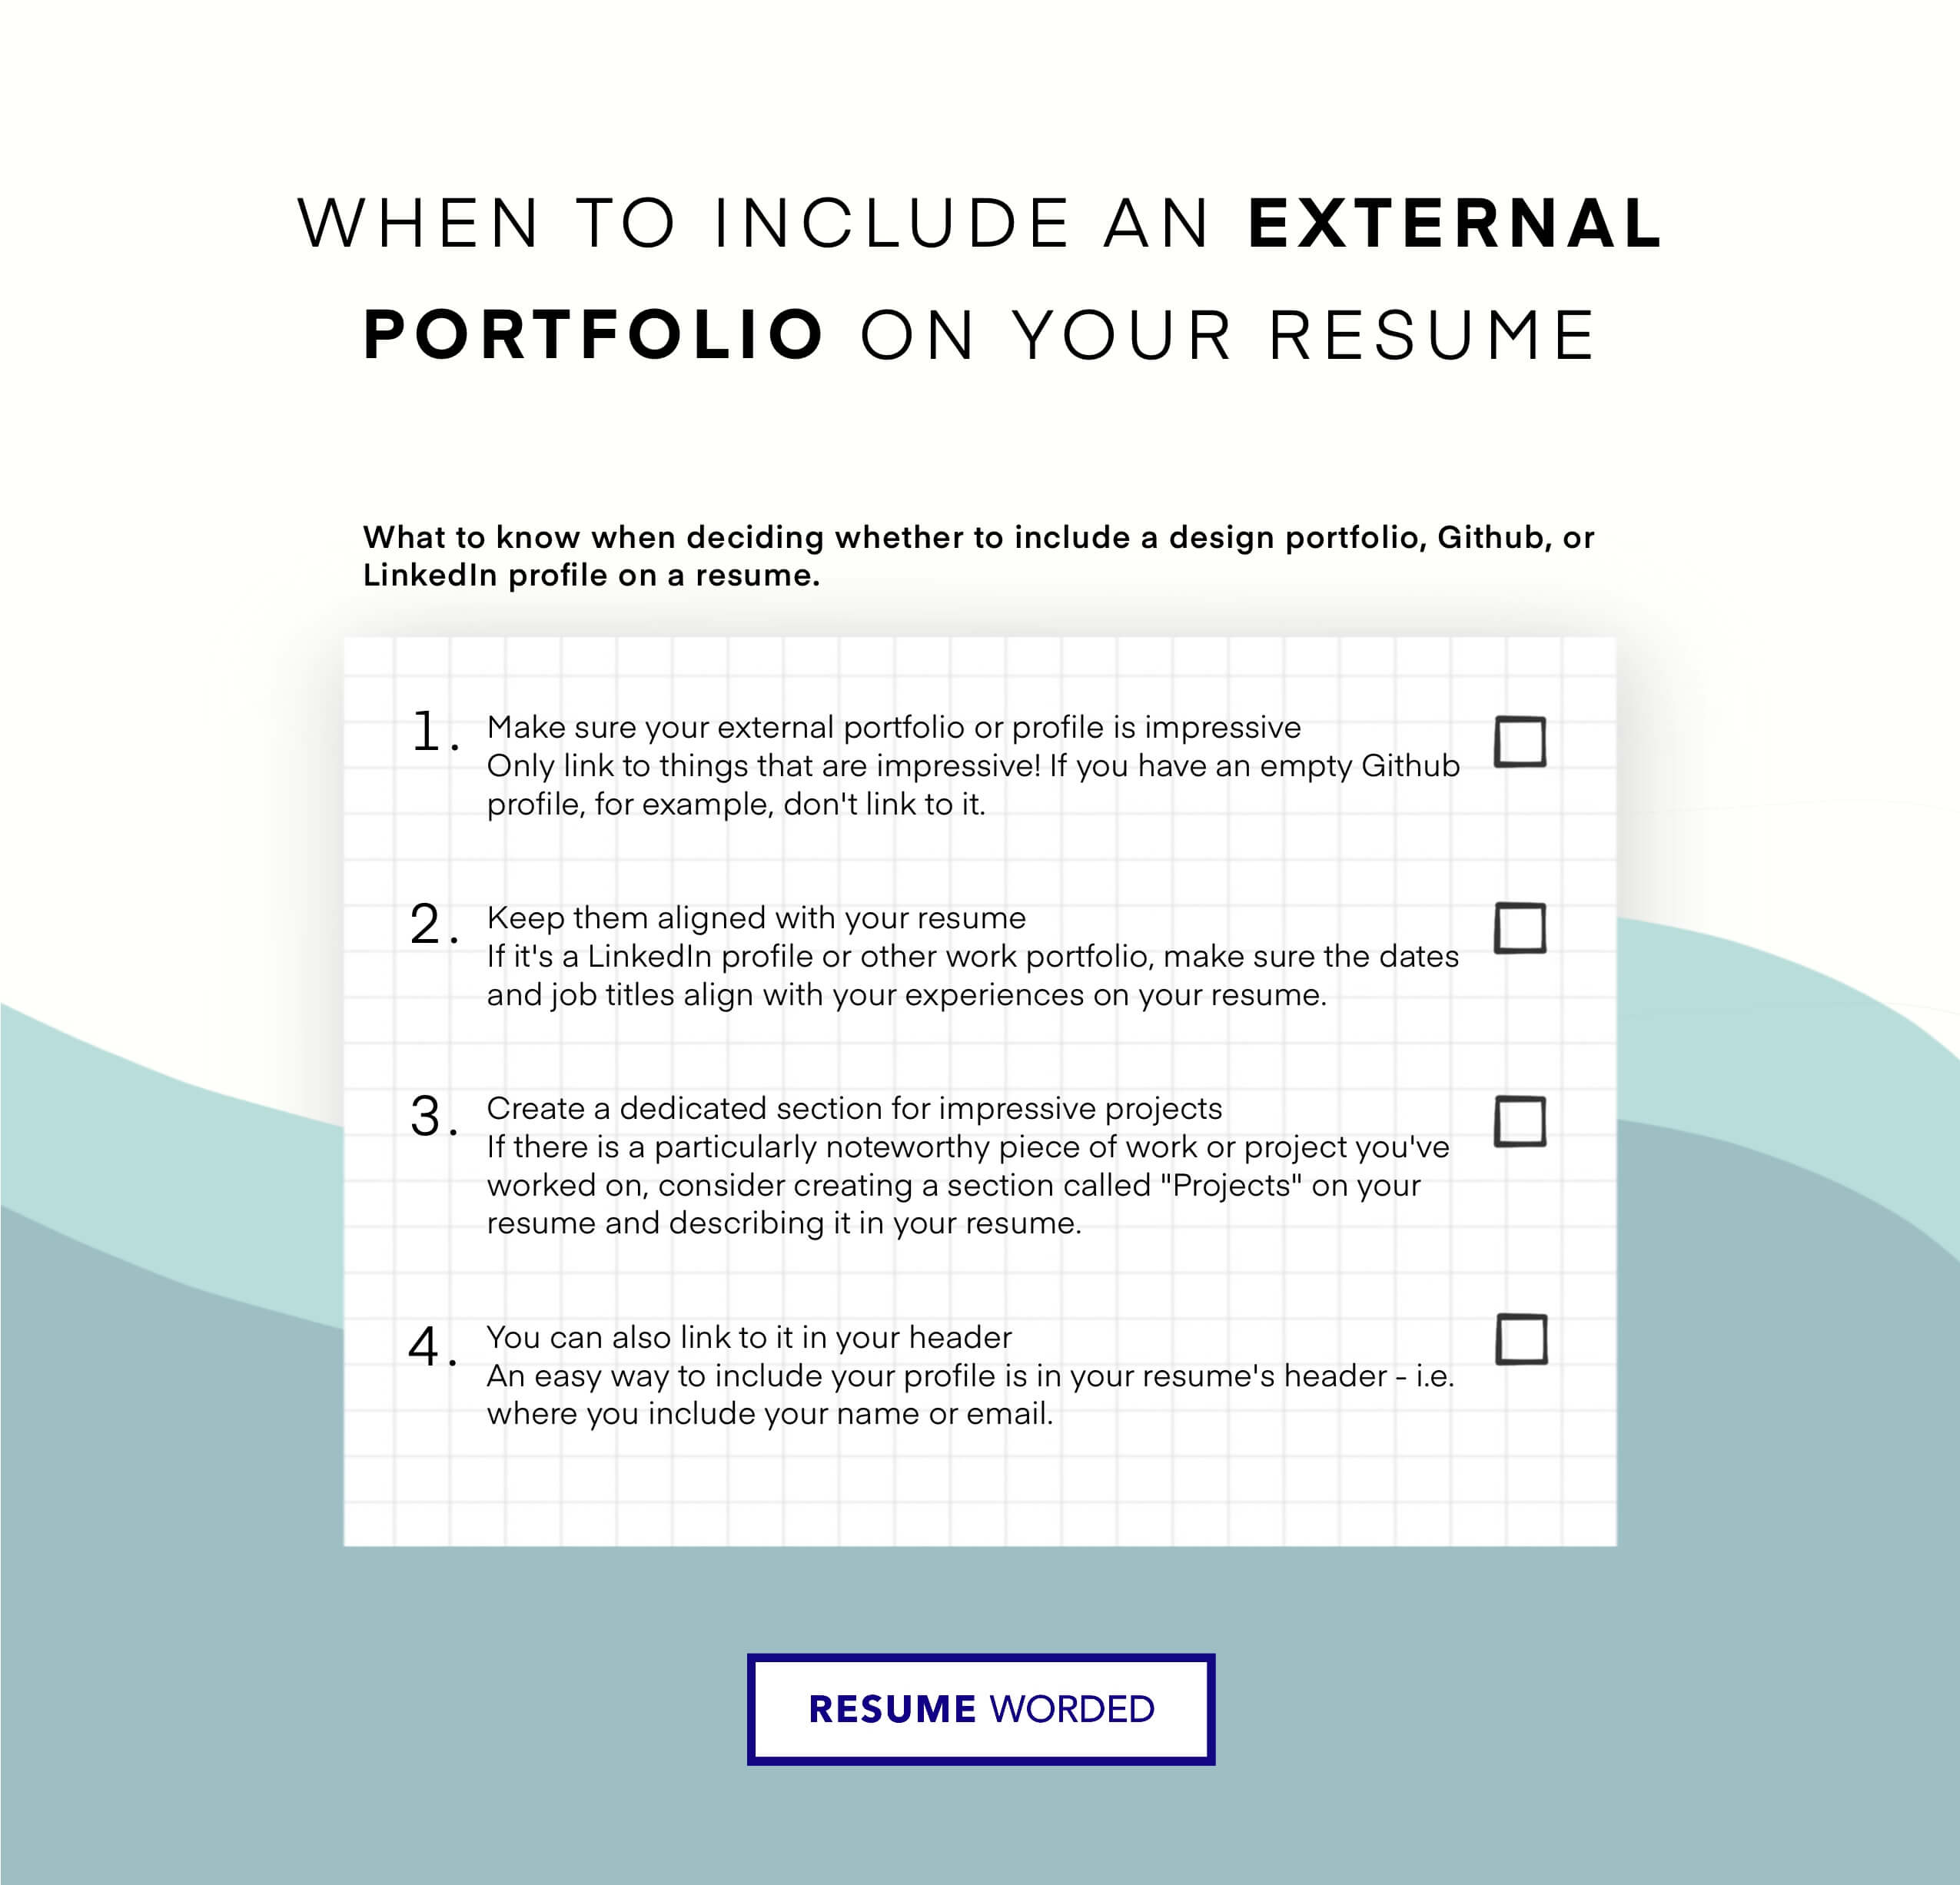 Create an effective work portfolio and link to it from your resume. - Copywriter Resume